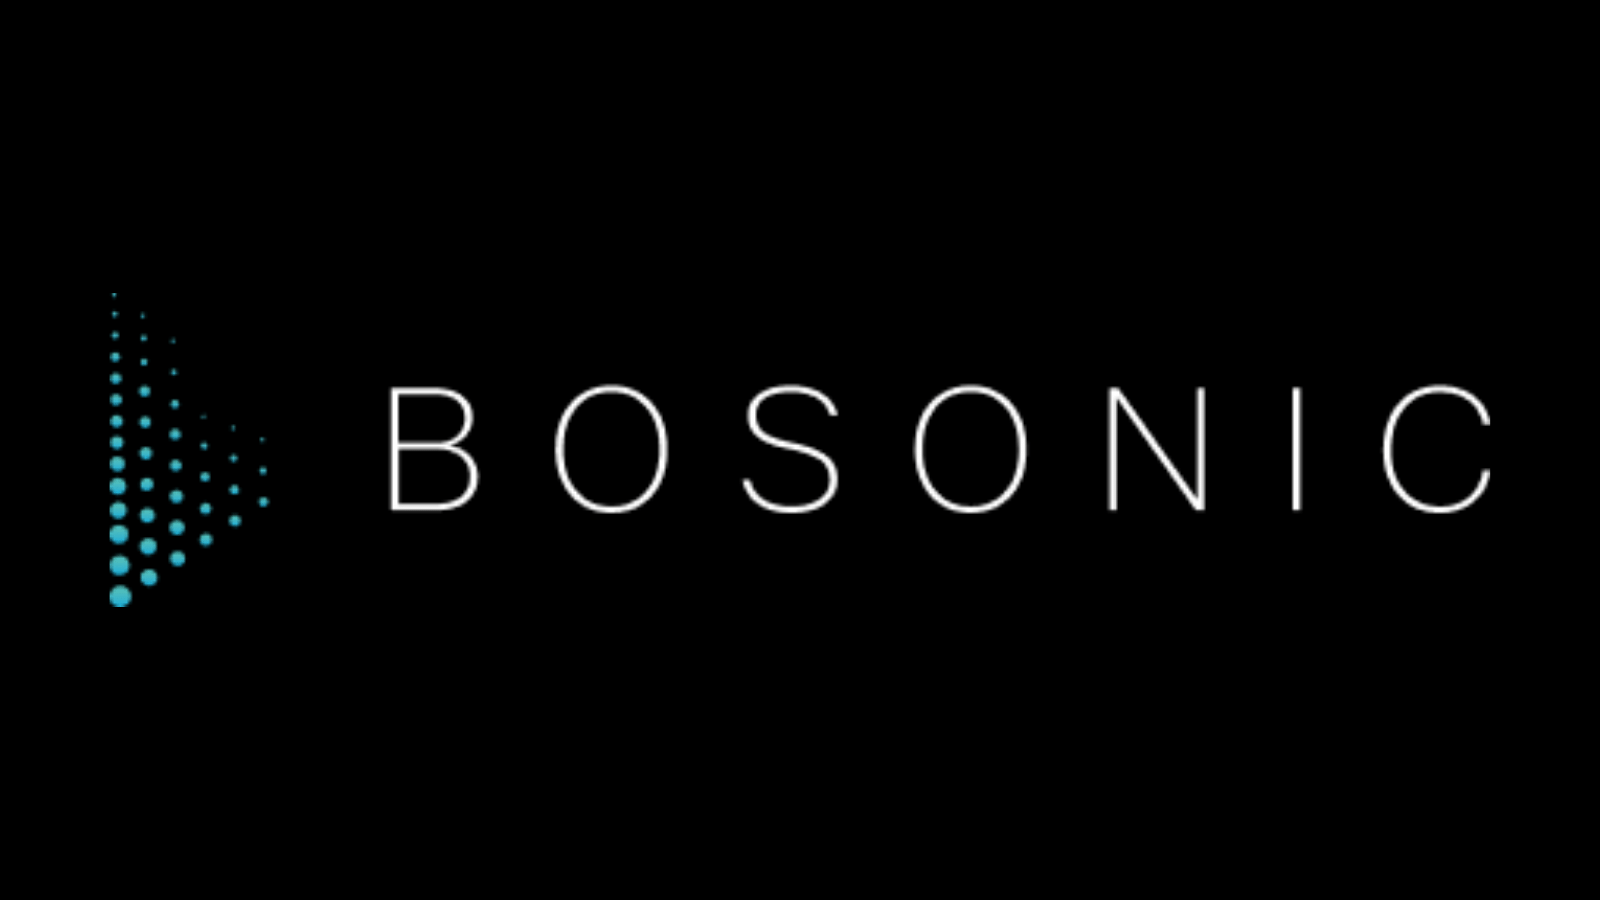 Digital Asset Clearing and Settlement Platform Bosonic Adds 3 Senior Advisors and Other Staff Additions